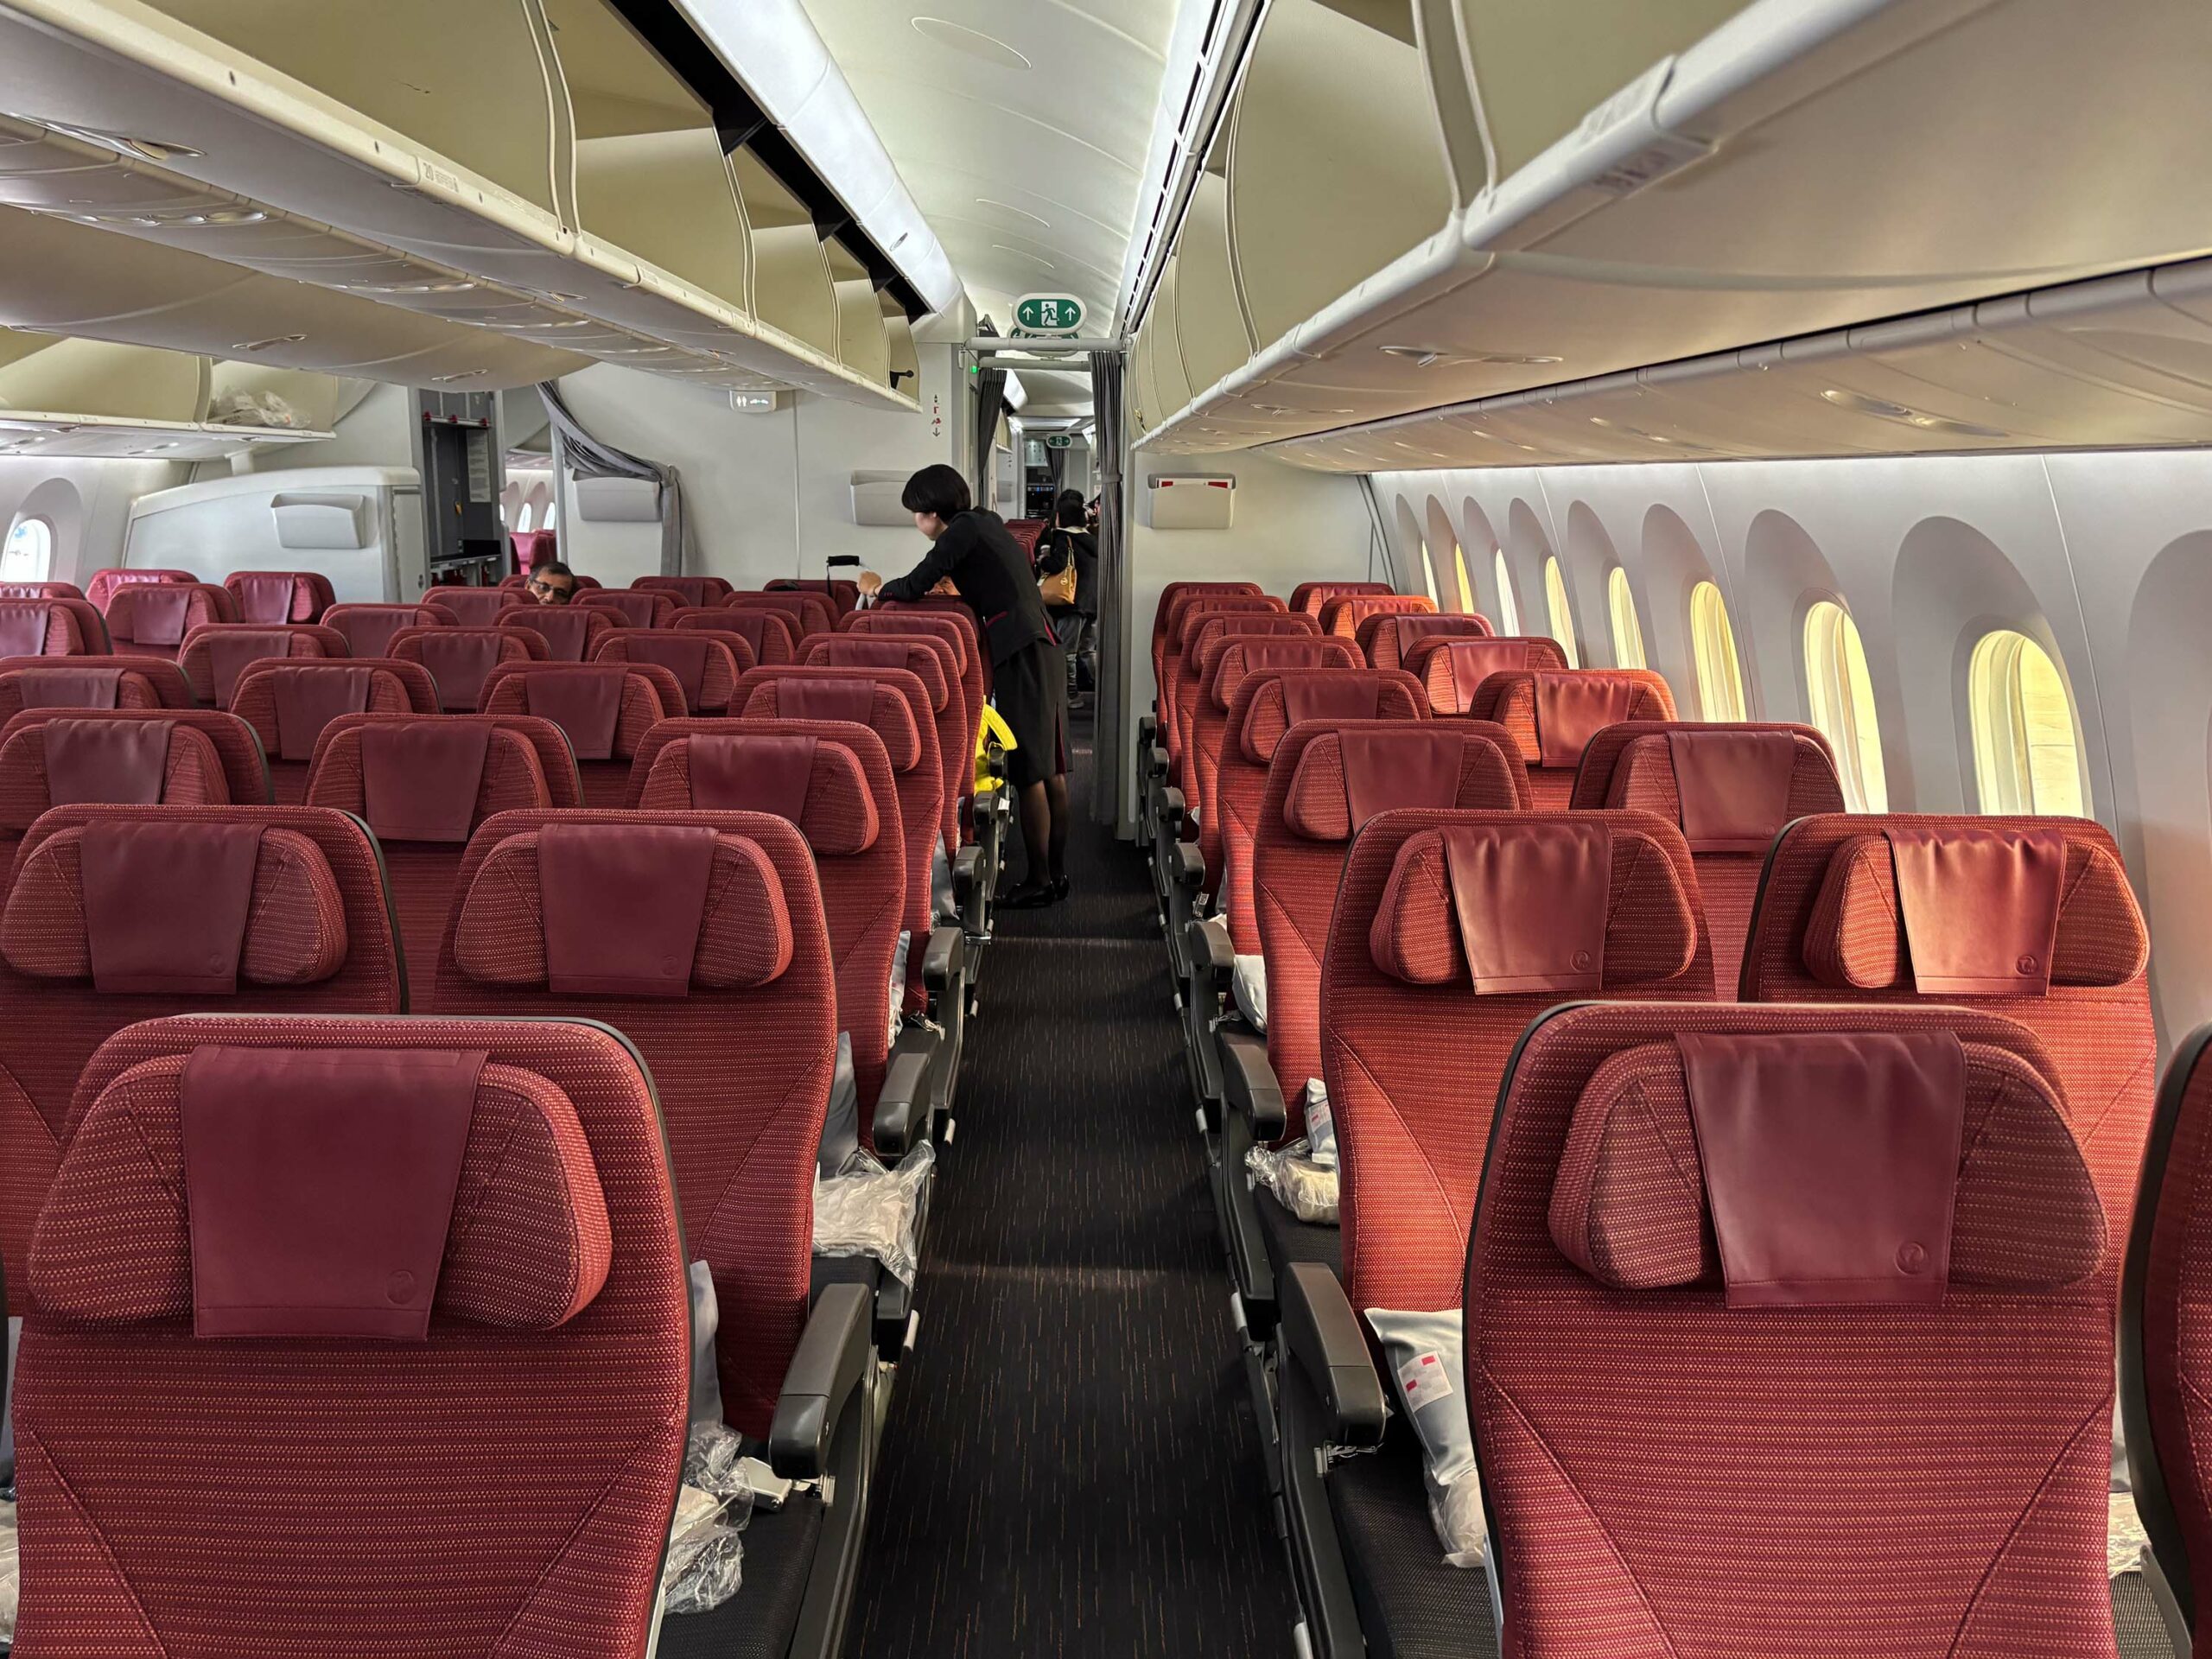 Review: Japan Airlines 787-8 Economy Class (LAX-NRT)